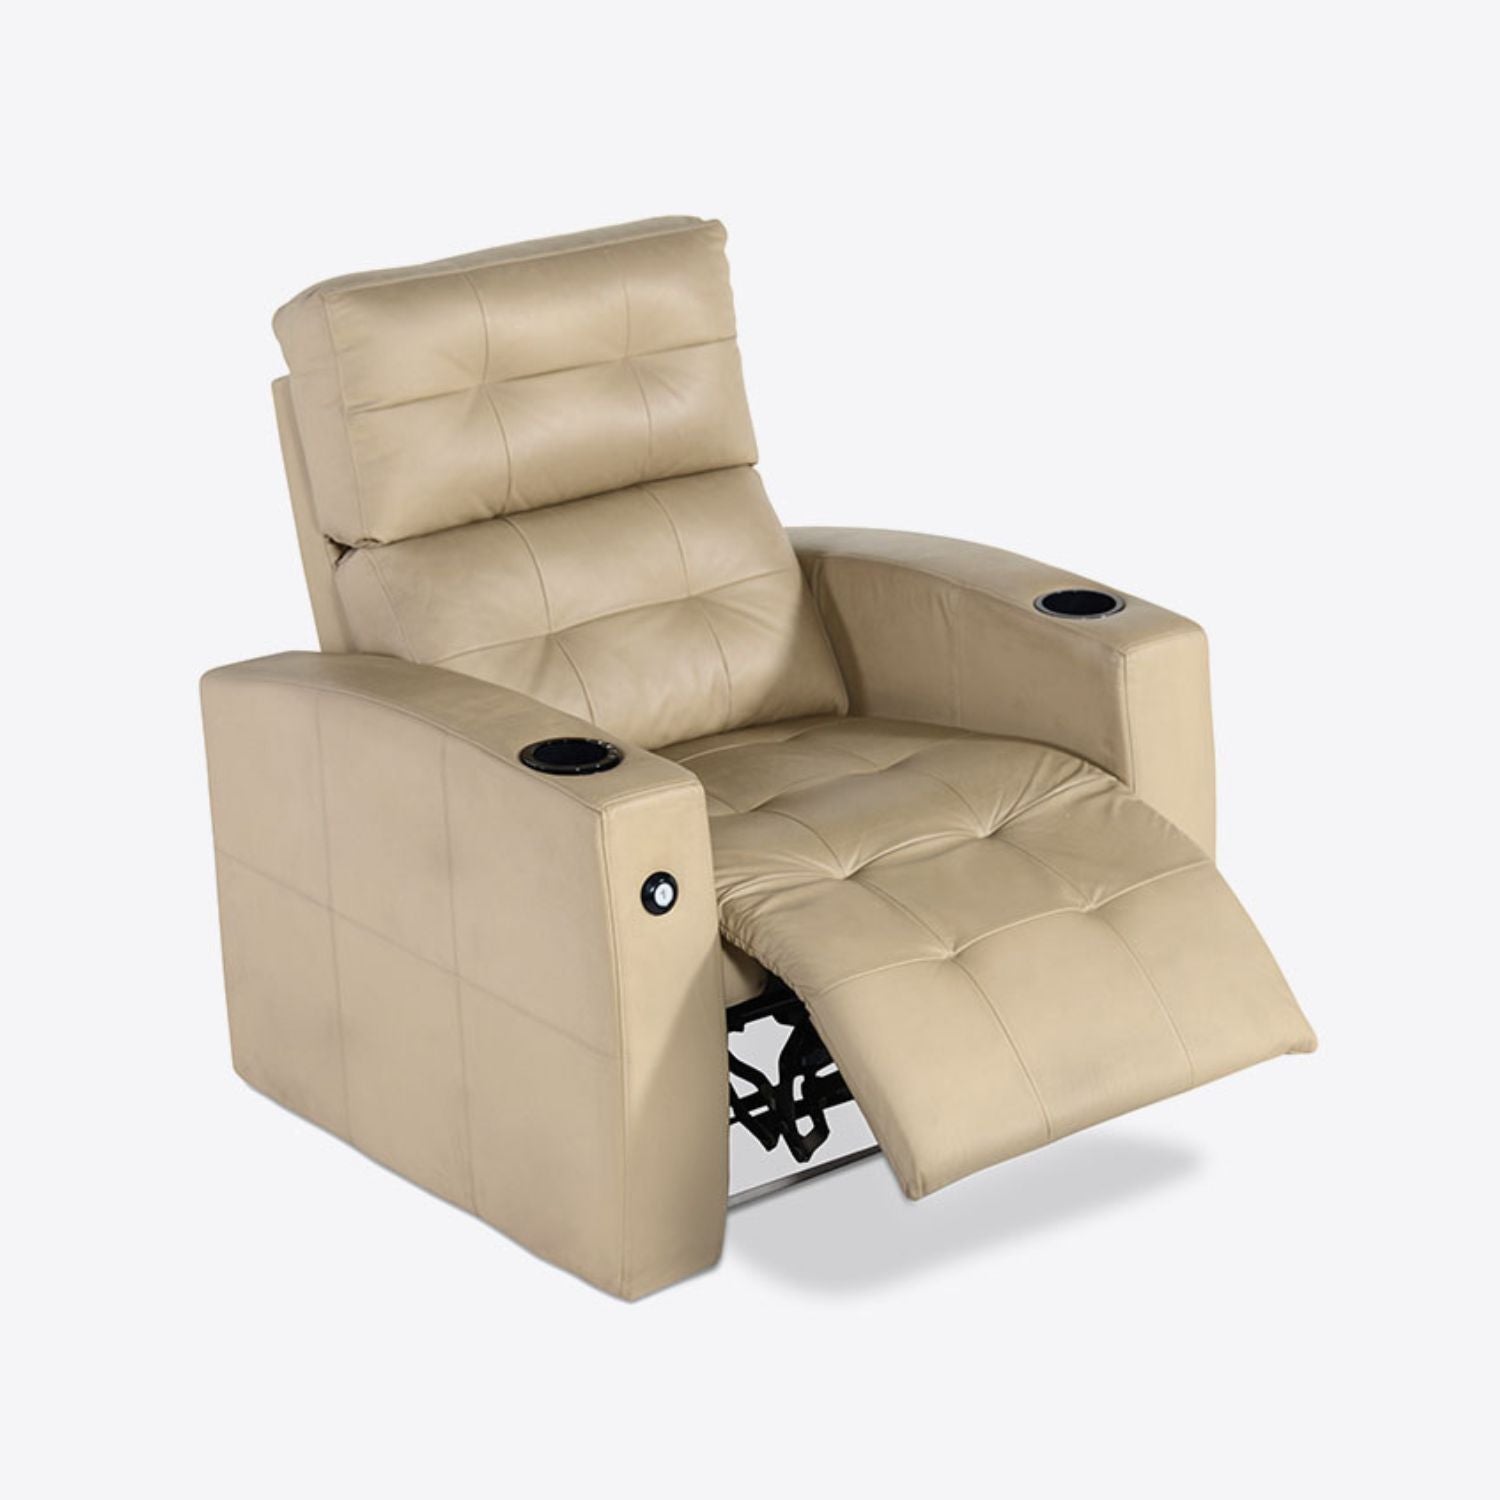 333 Home Theater Recliner 'Wood' 2 Arm Recliners India